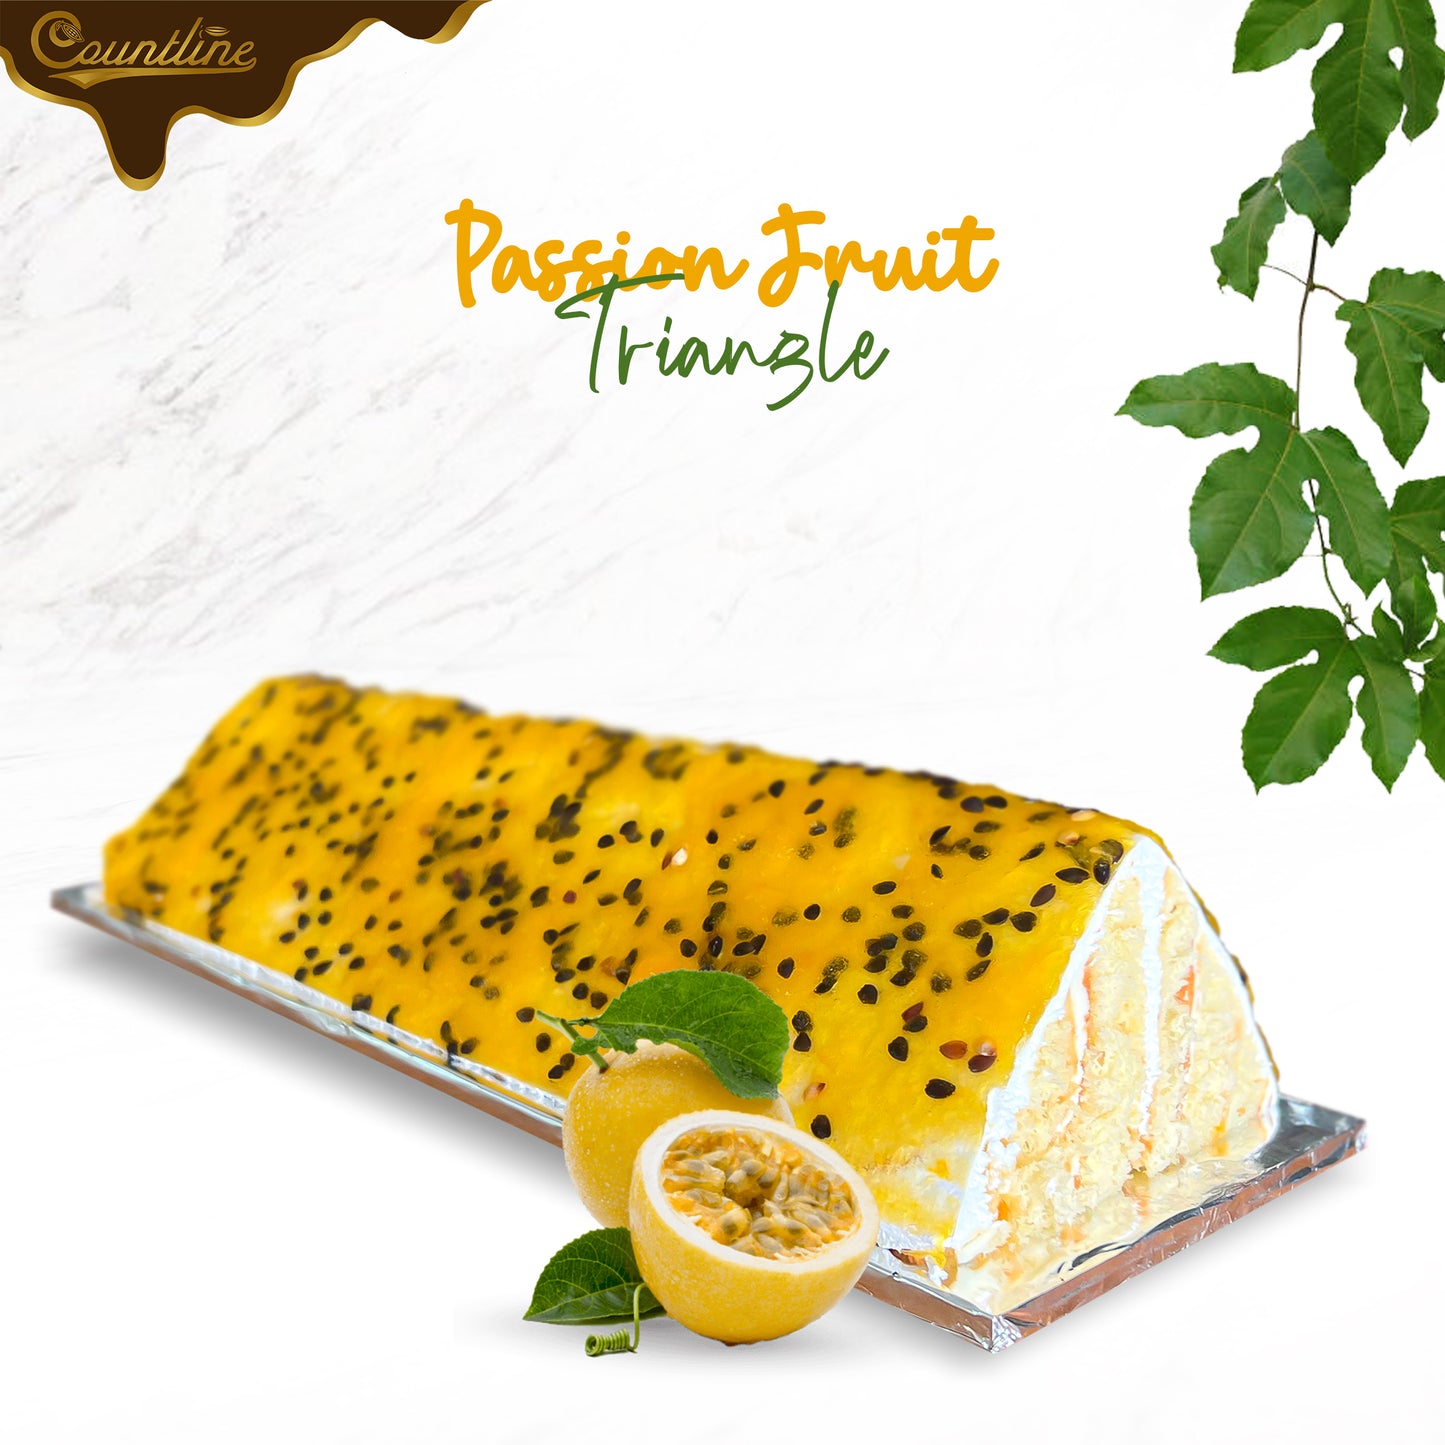 Passion Fruit Triangle